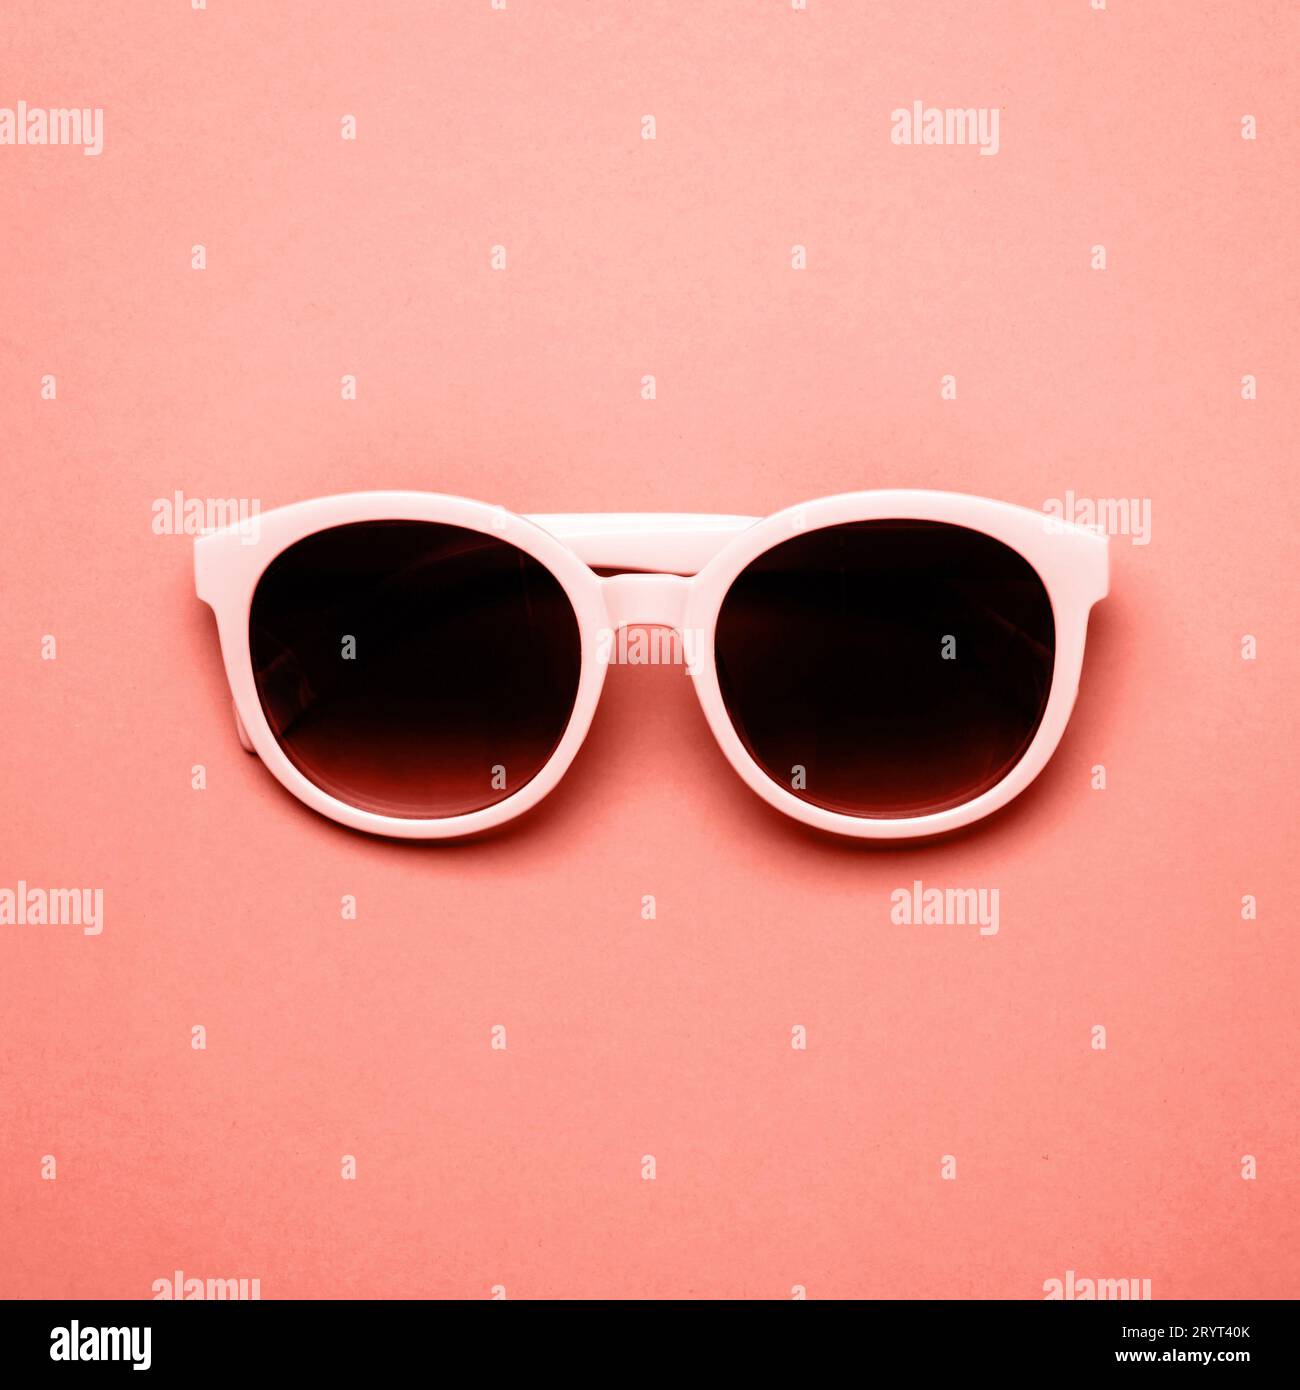 A Pair Of Glasses On A White Background, Sunglasses, Accessories, Fashion  Background Image And Wallpaper for Free Download